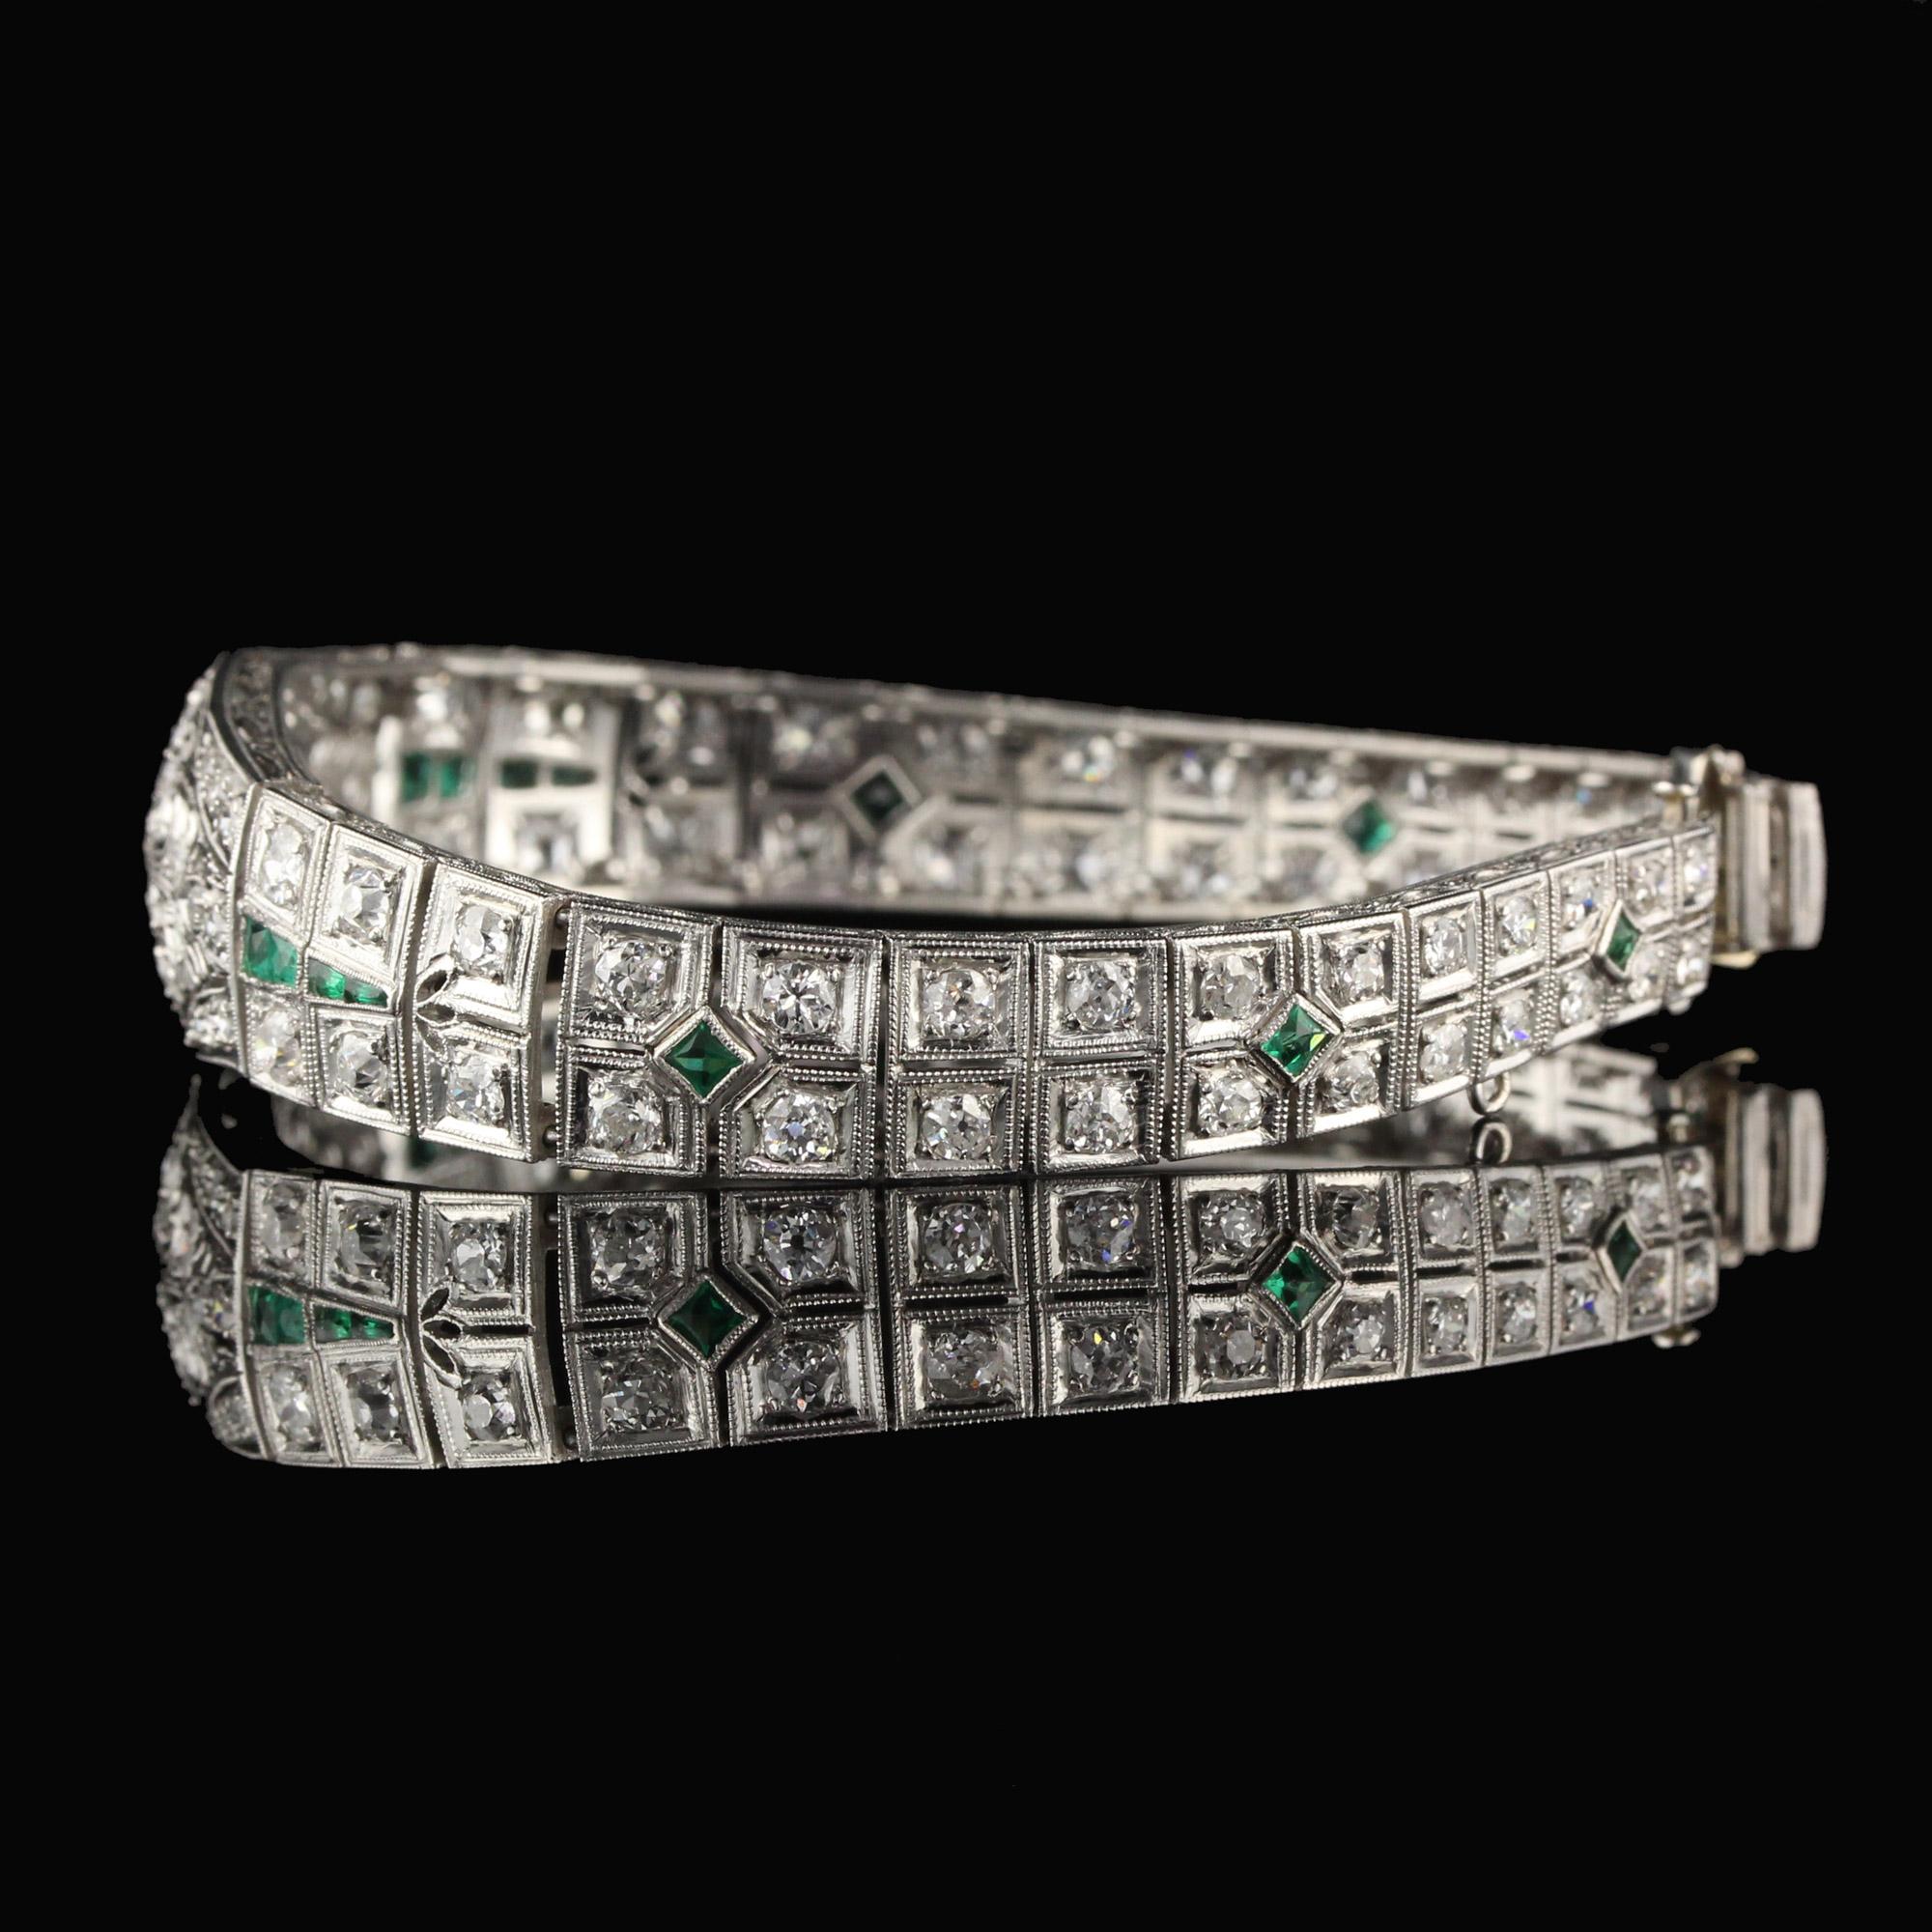 Antique Art Deco Platinum Old Euro Cut Diamond and Emerald Bracelet In Good Condition For Sale In Great Neck, NY